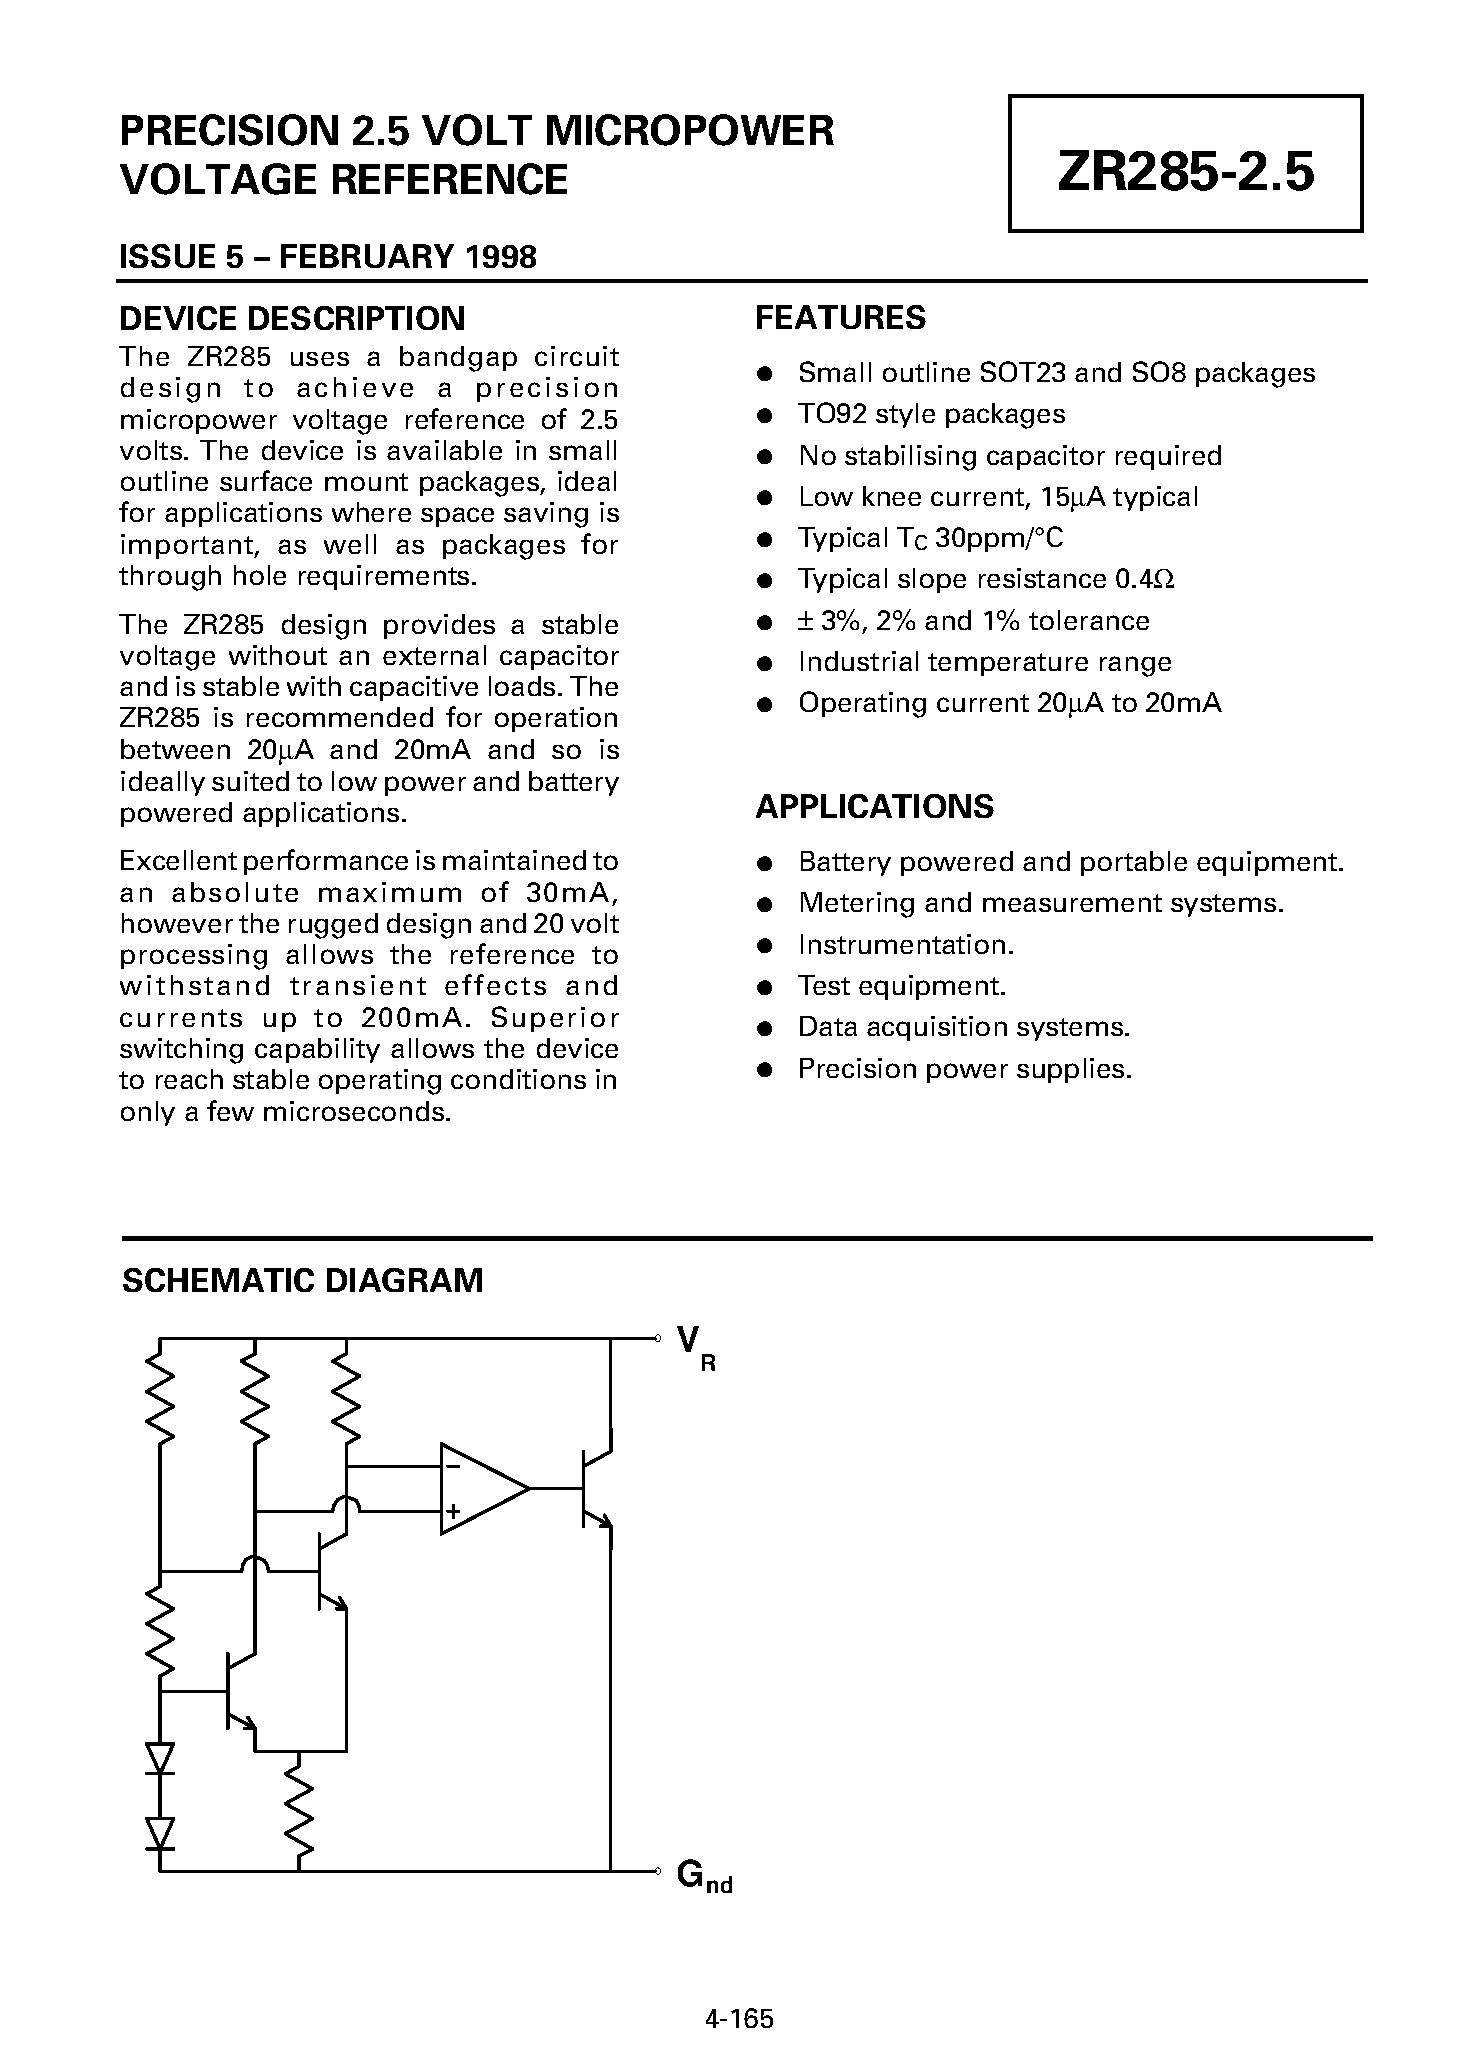 Datasheet ZR285Y02 - PRECISION 2.5 VOLT MICROPOWER VOLTAGE REFERENCE page 1